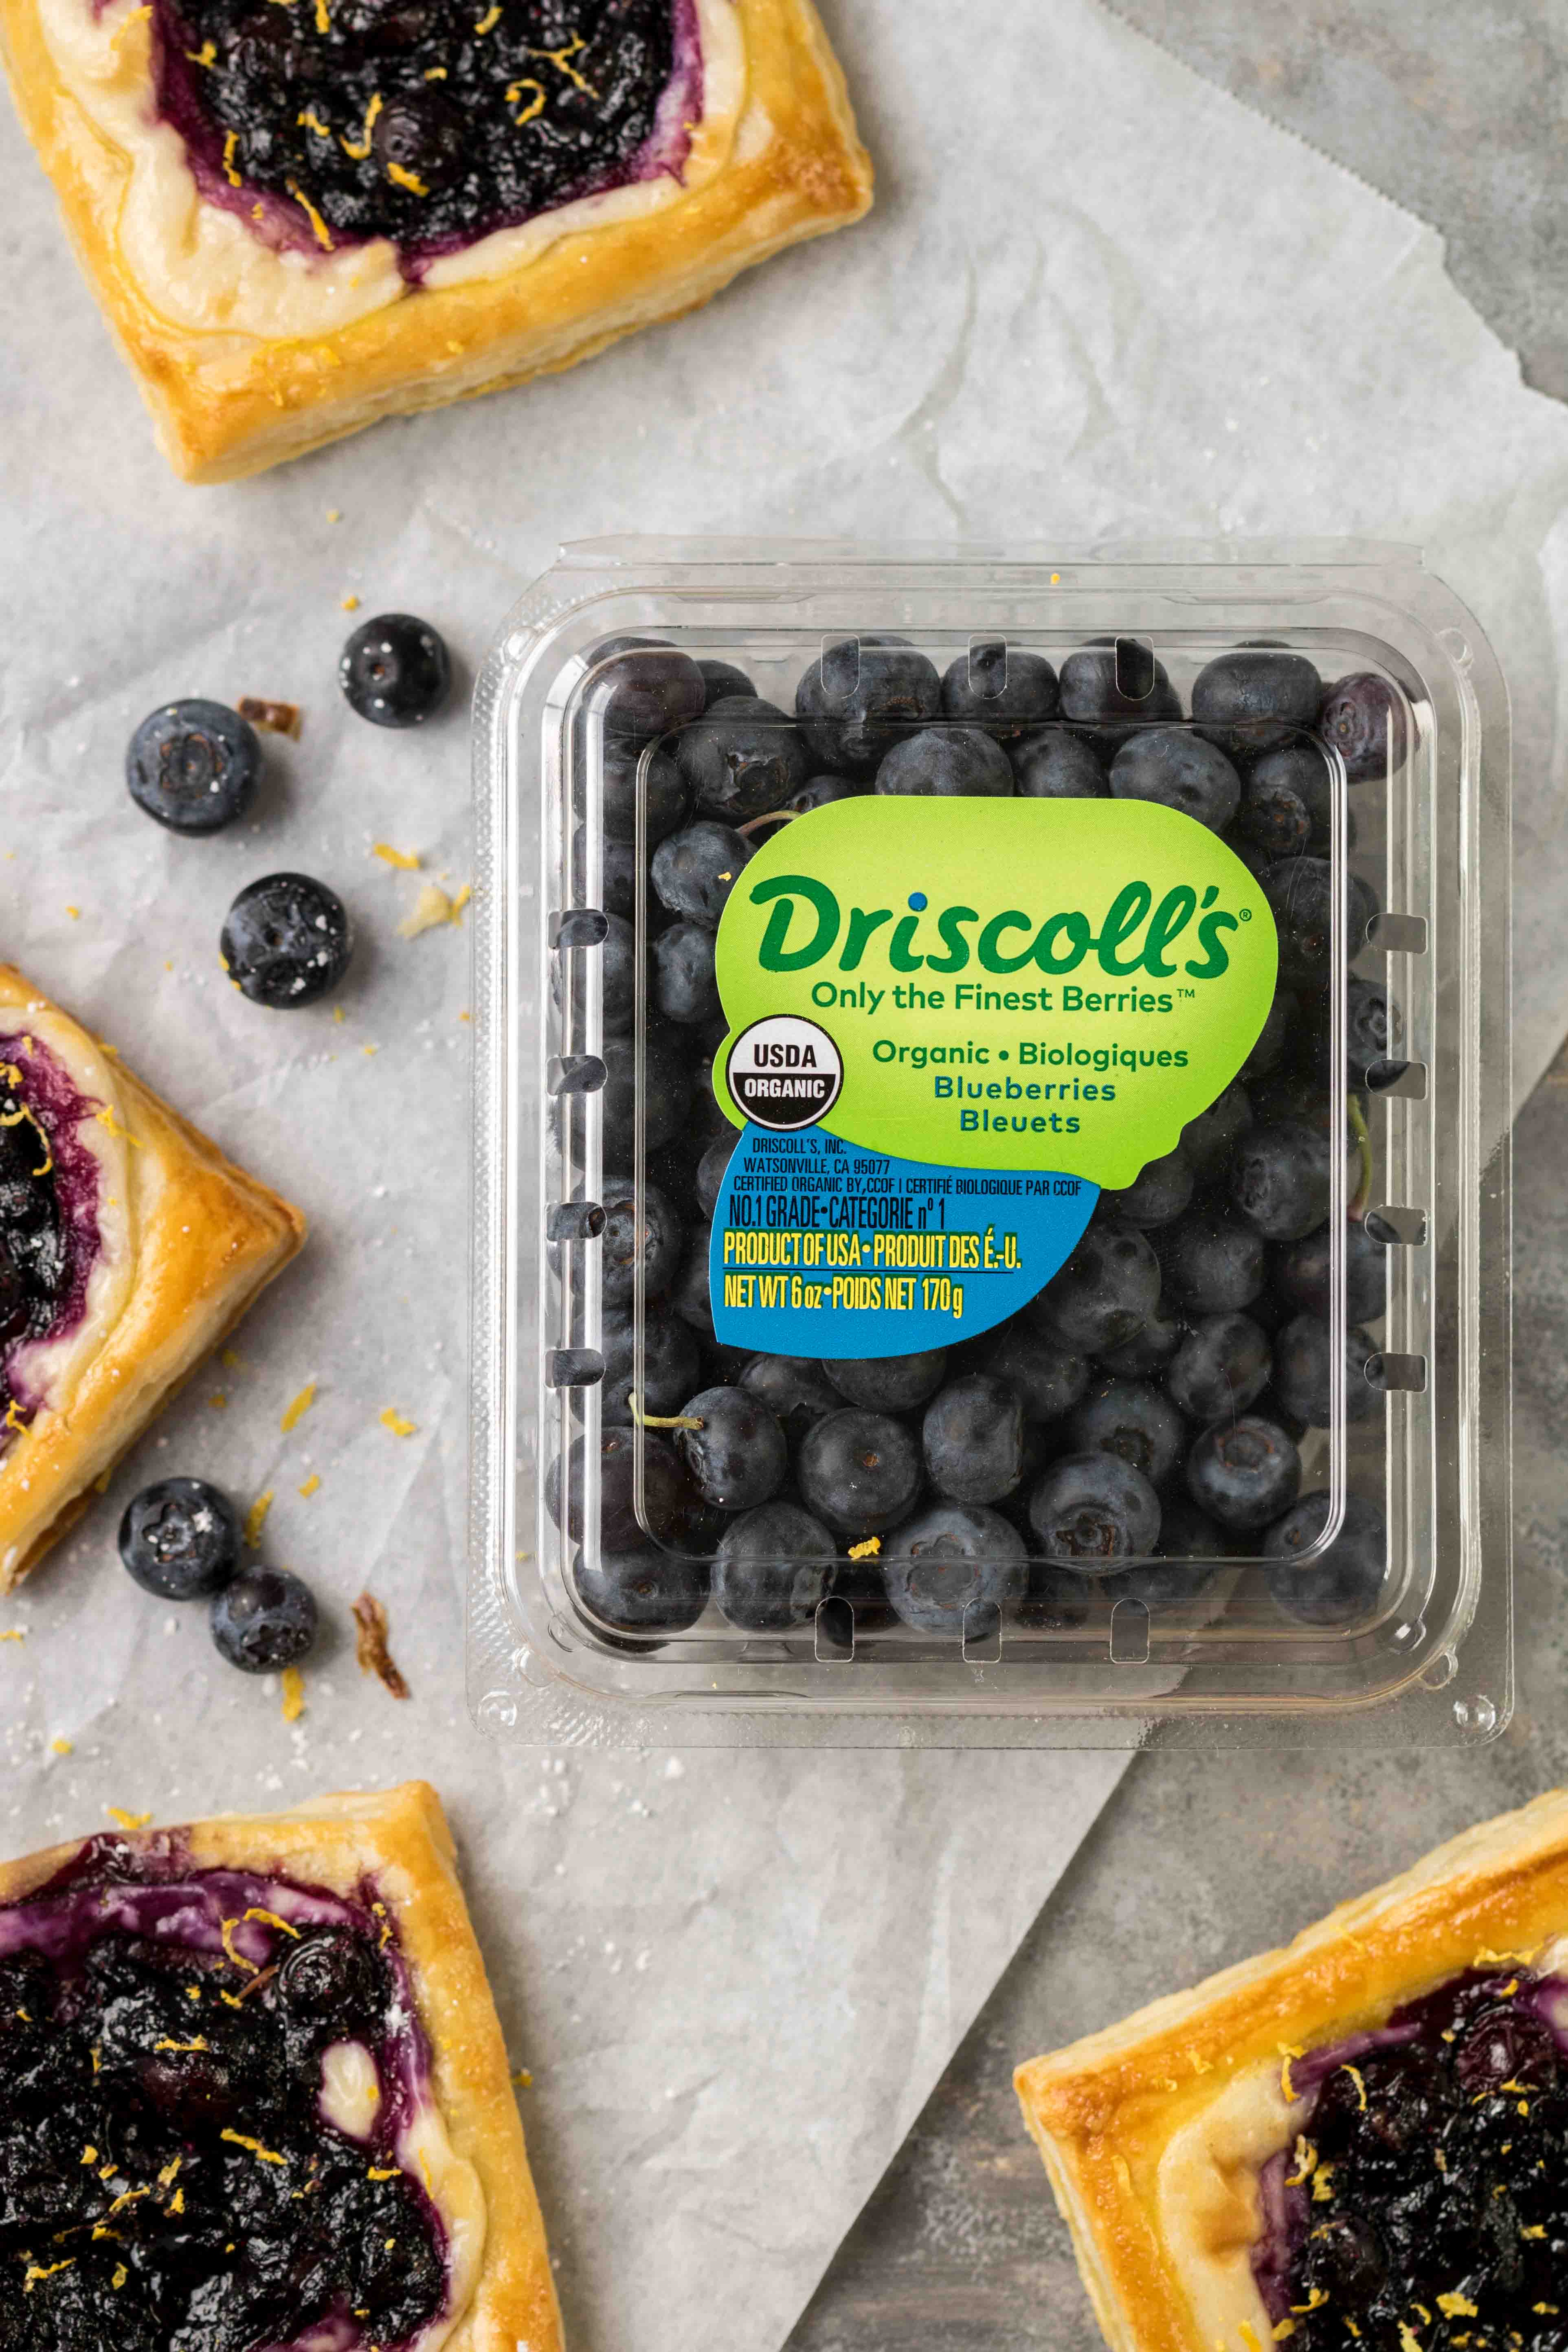 Blueberry cheese danish with Driscoll's berries